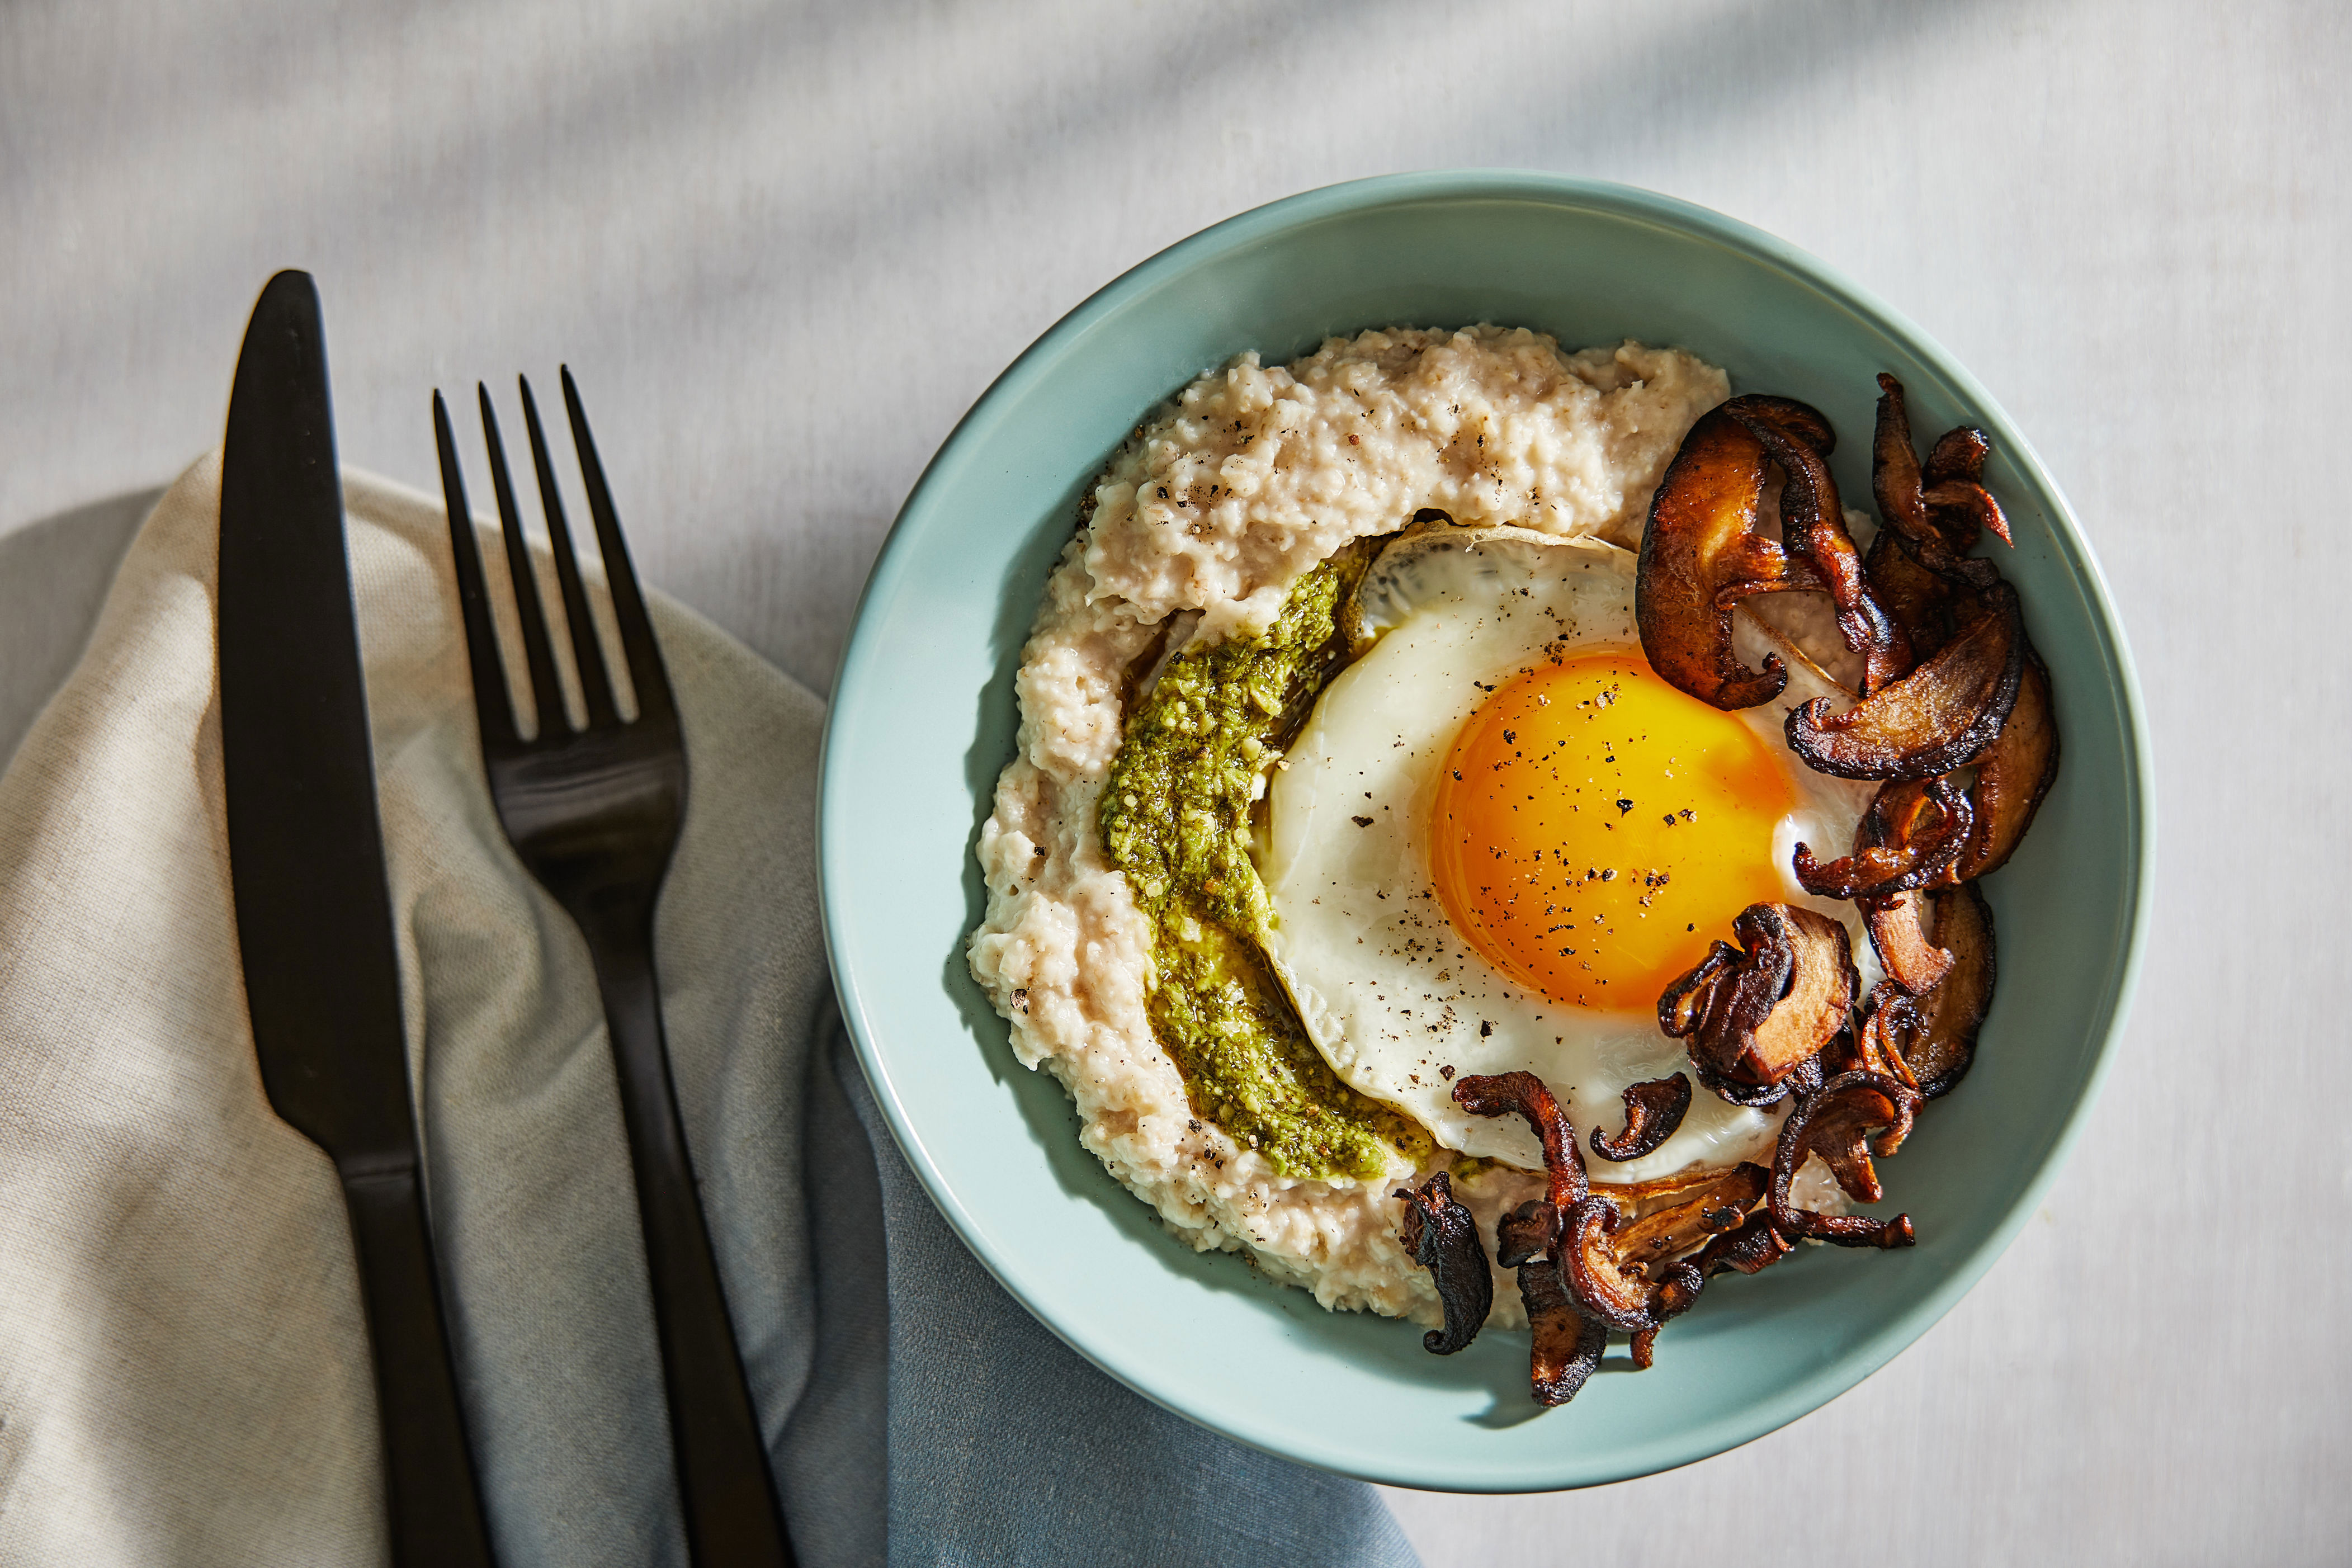 Shake up breakfast with savory oatmeal with eggs and pesto